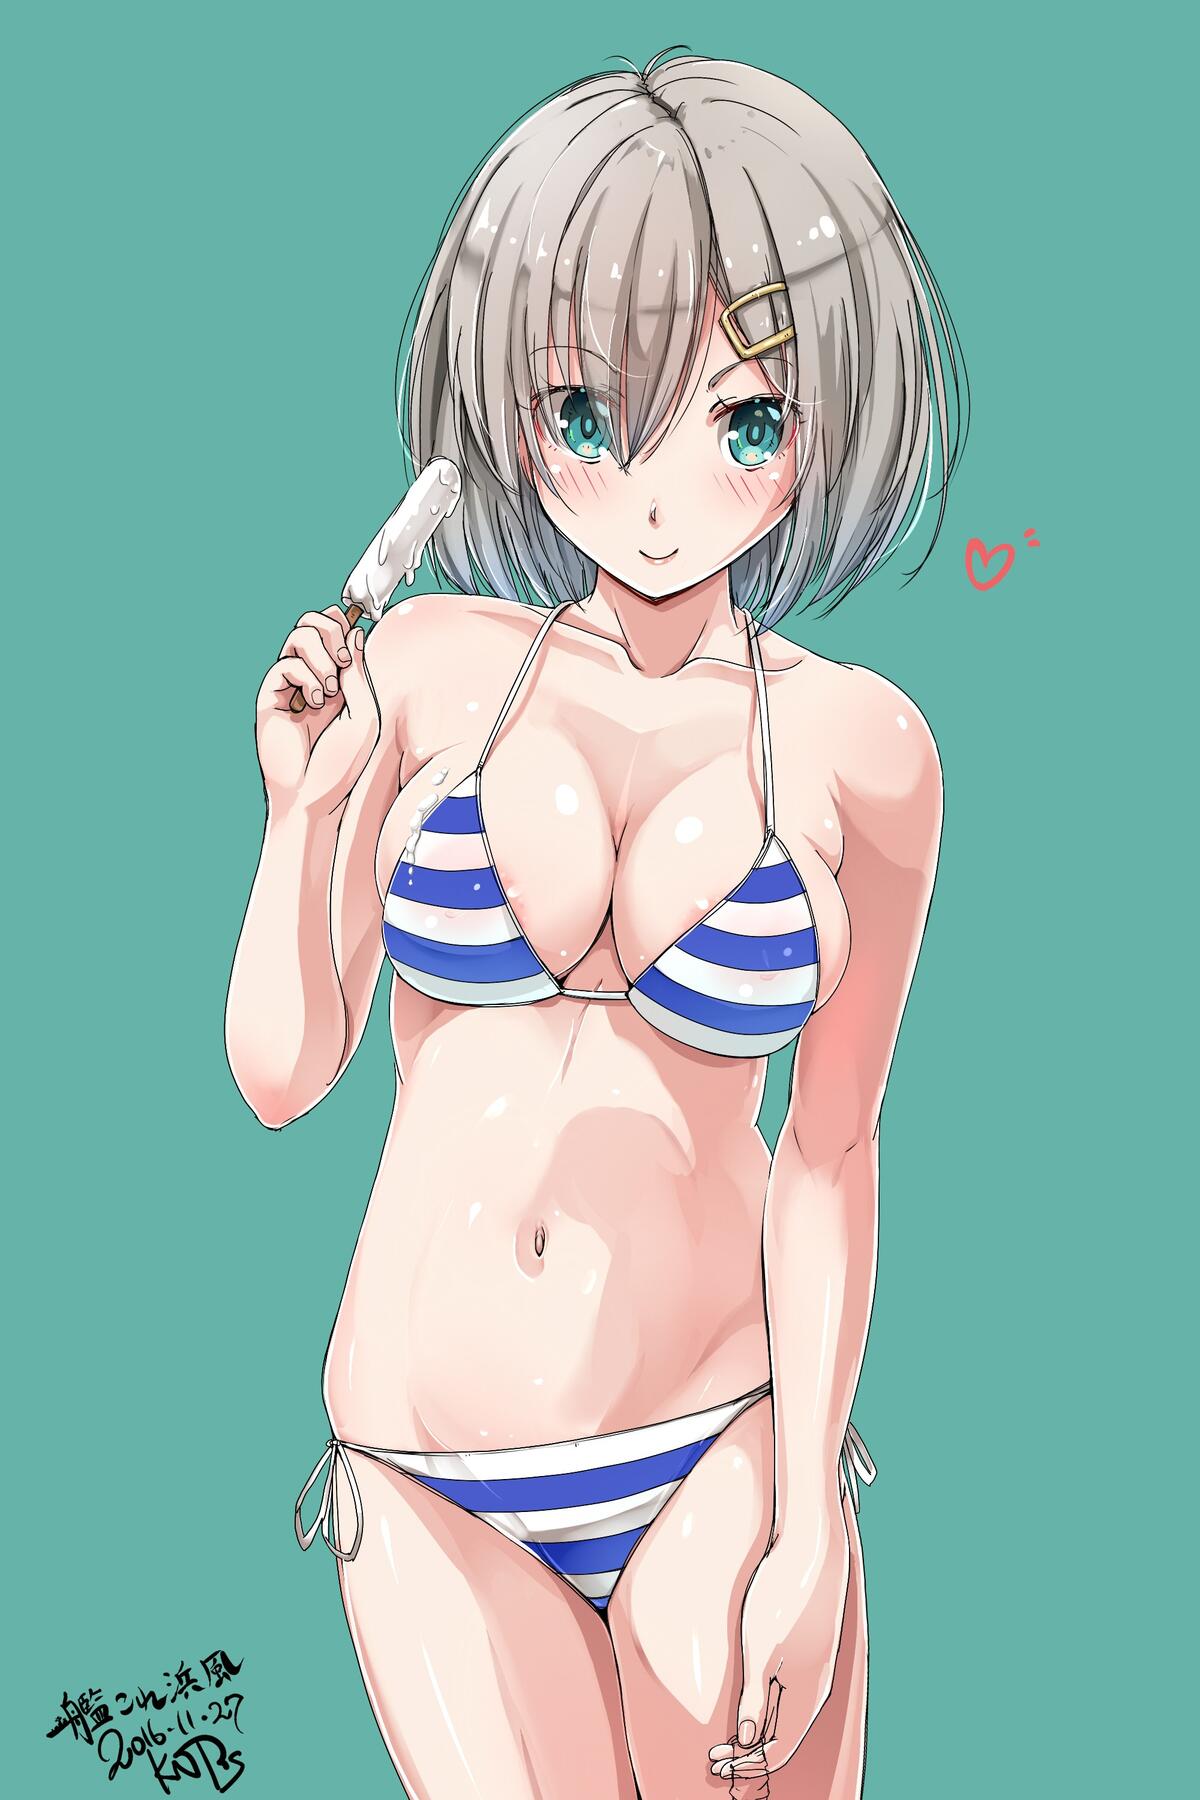 Anime girl with a beautiful body in a swimsuit